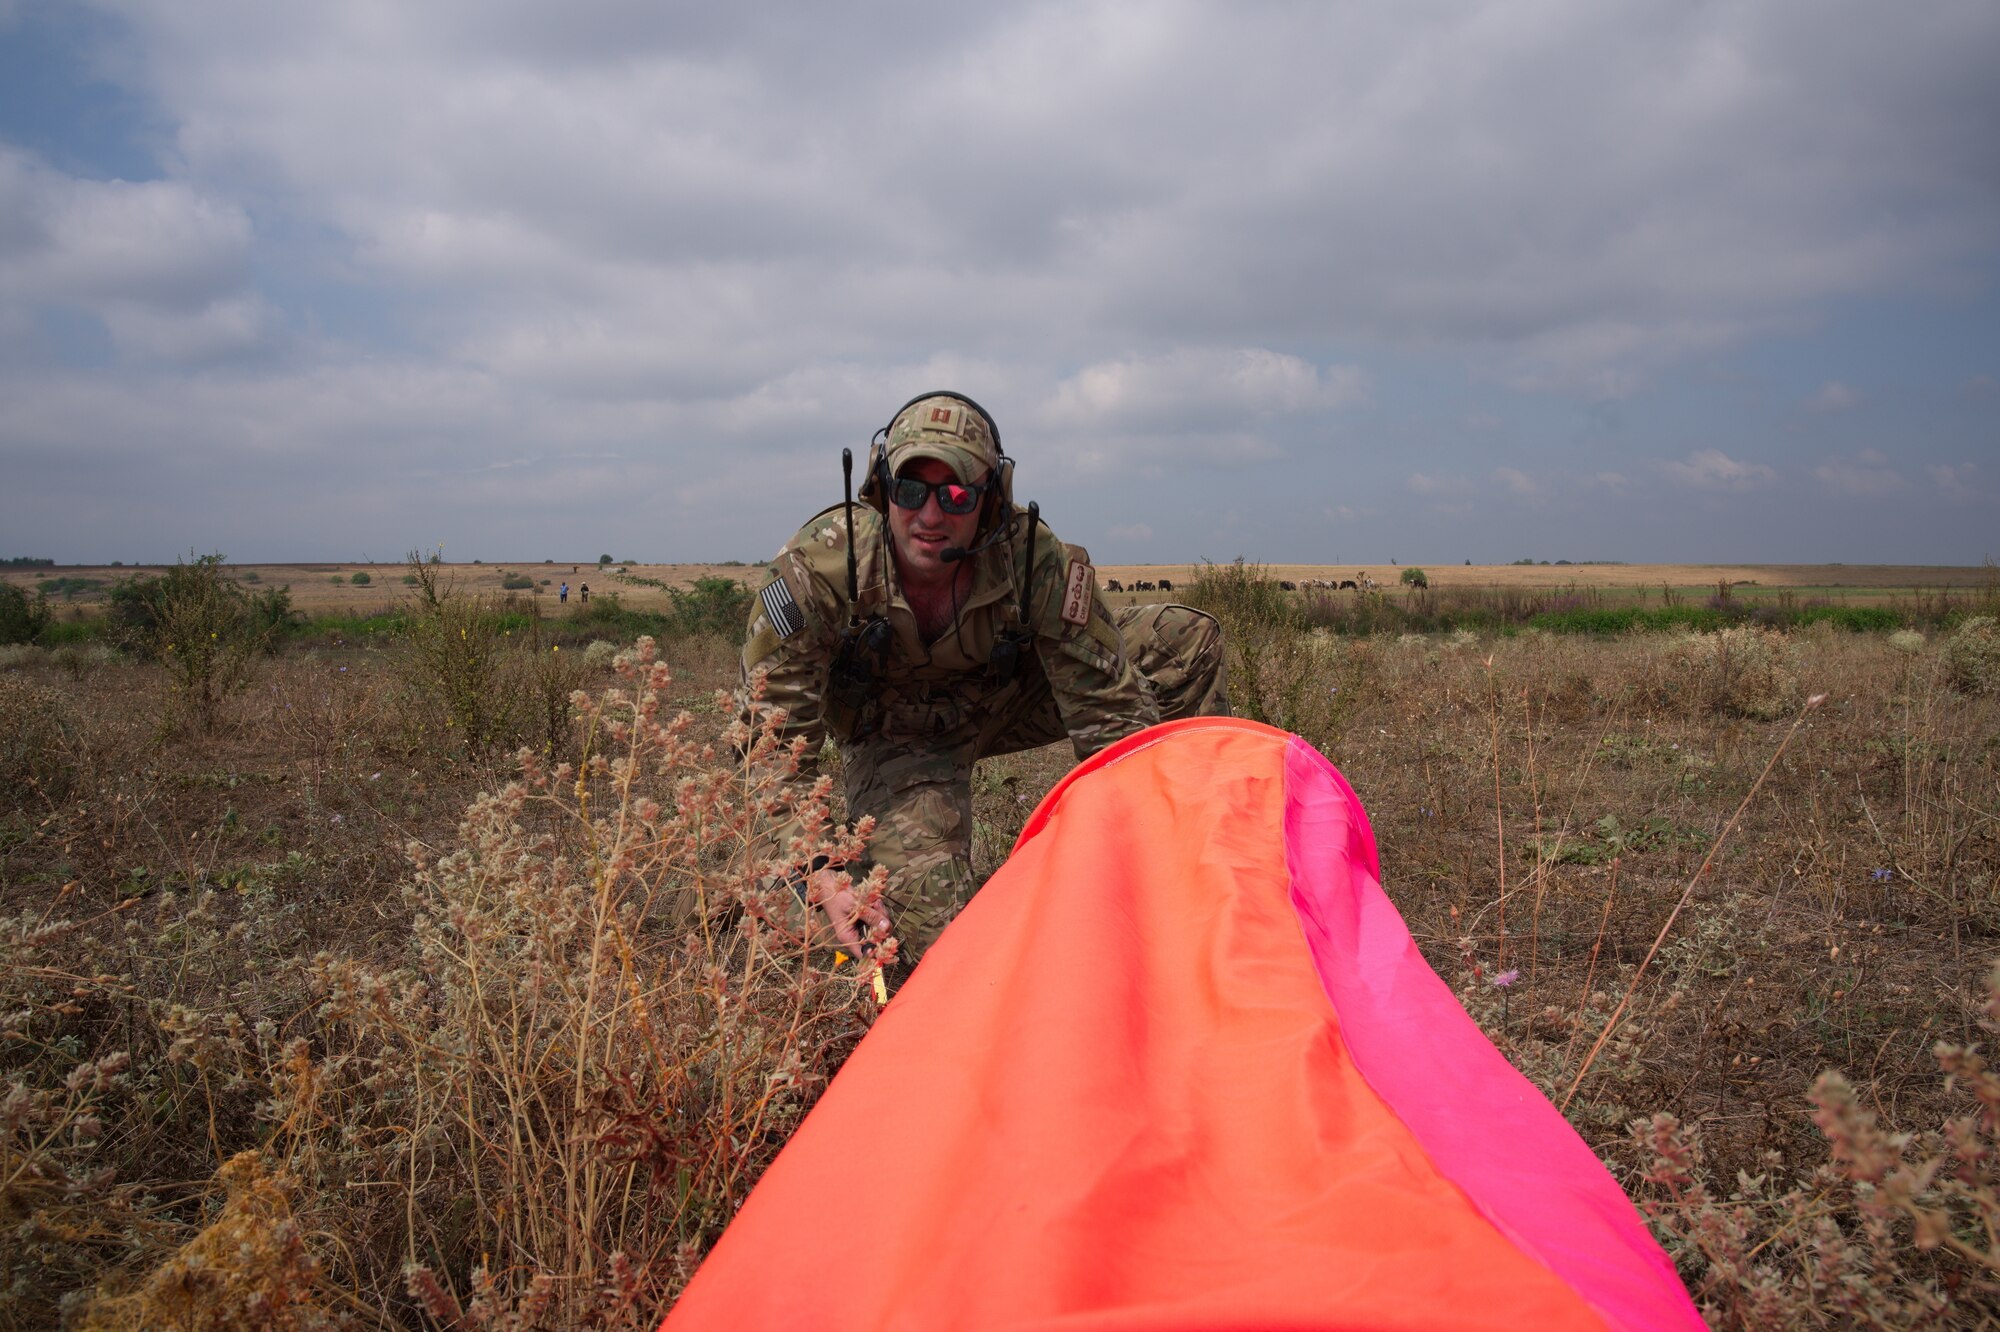 Airman sets-up landing markers for runway.